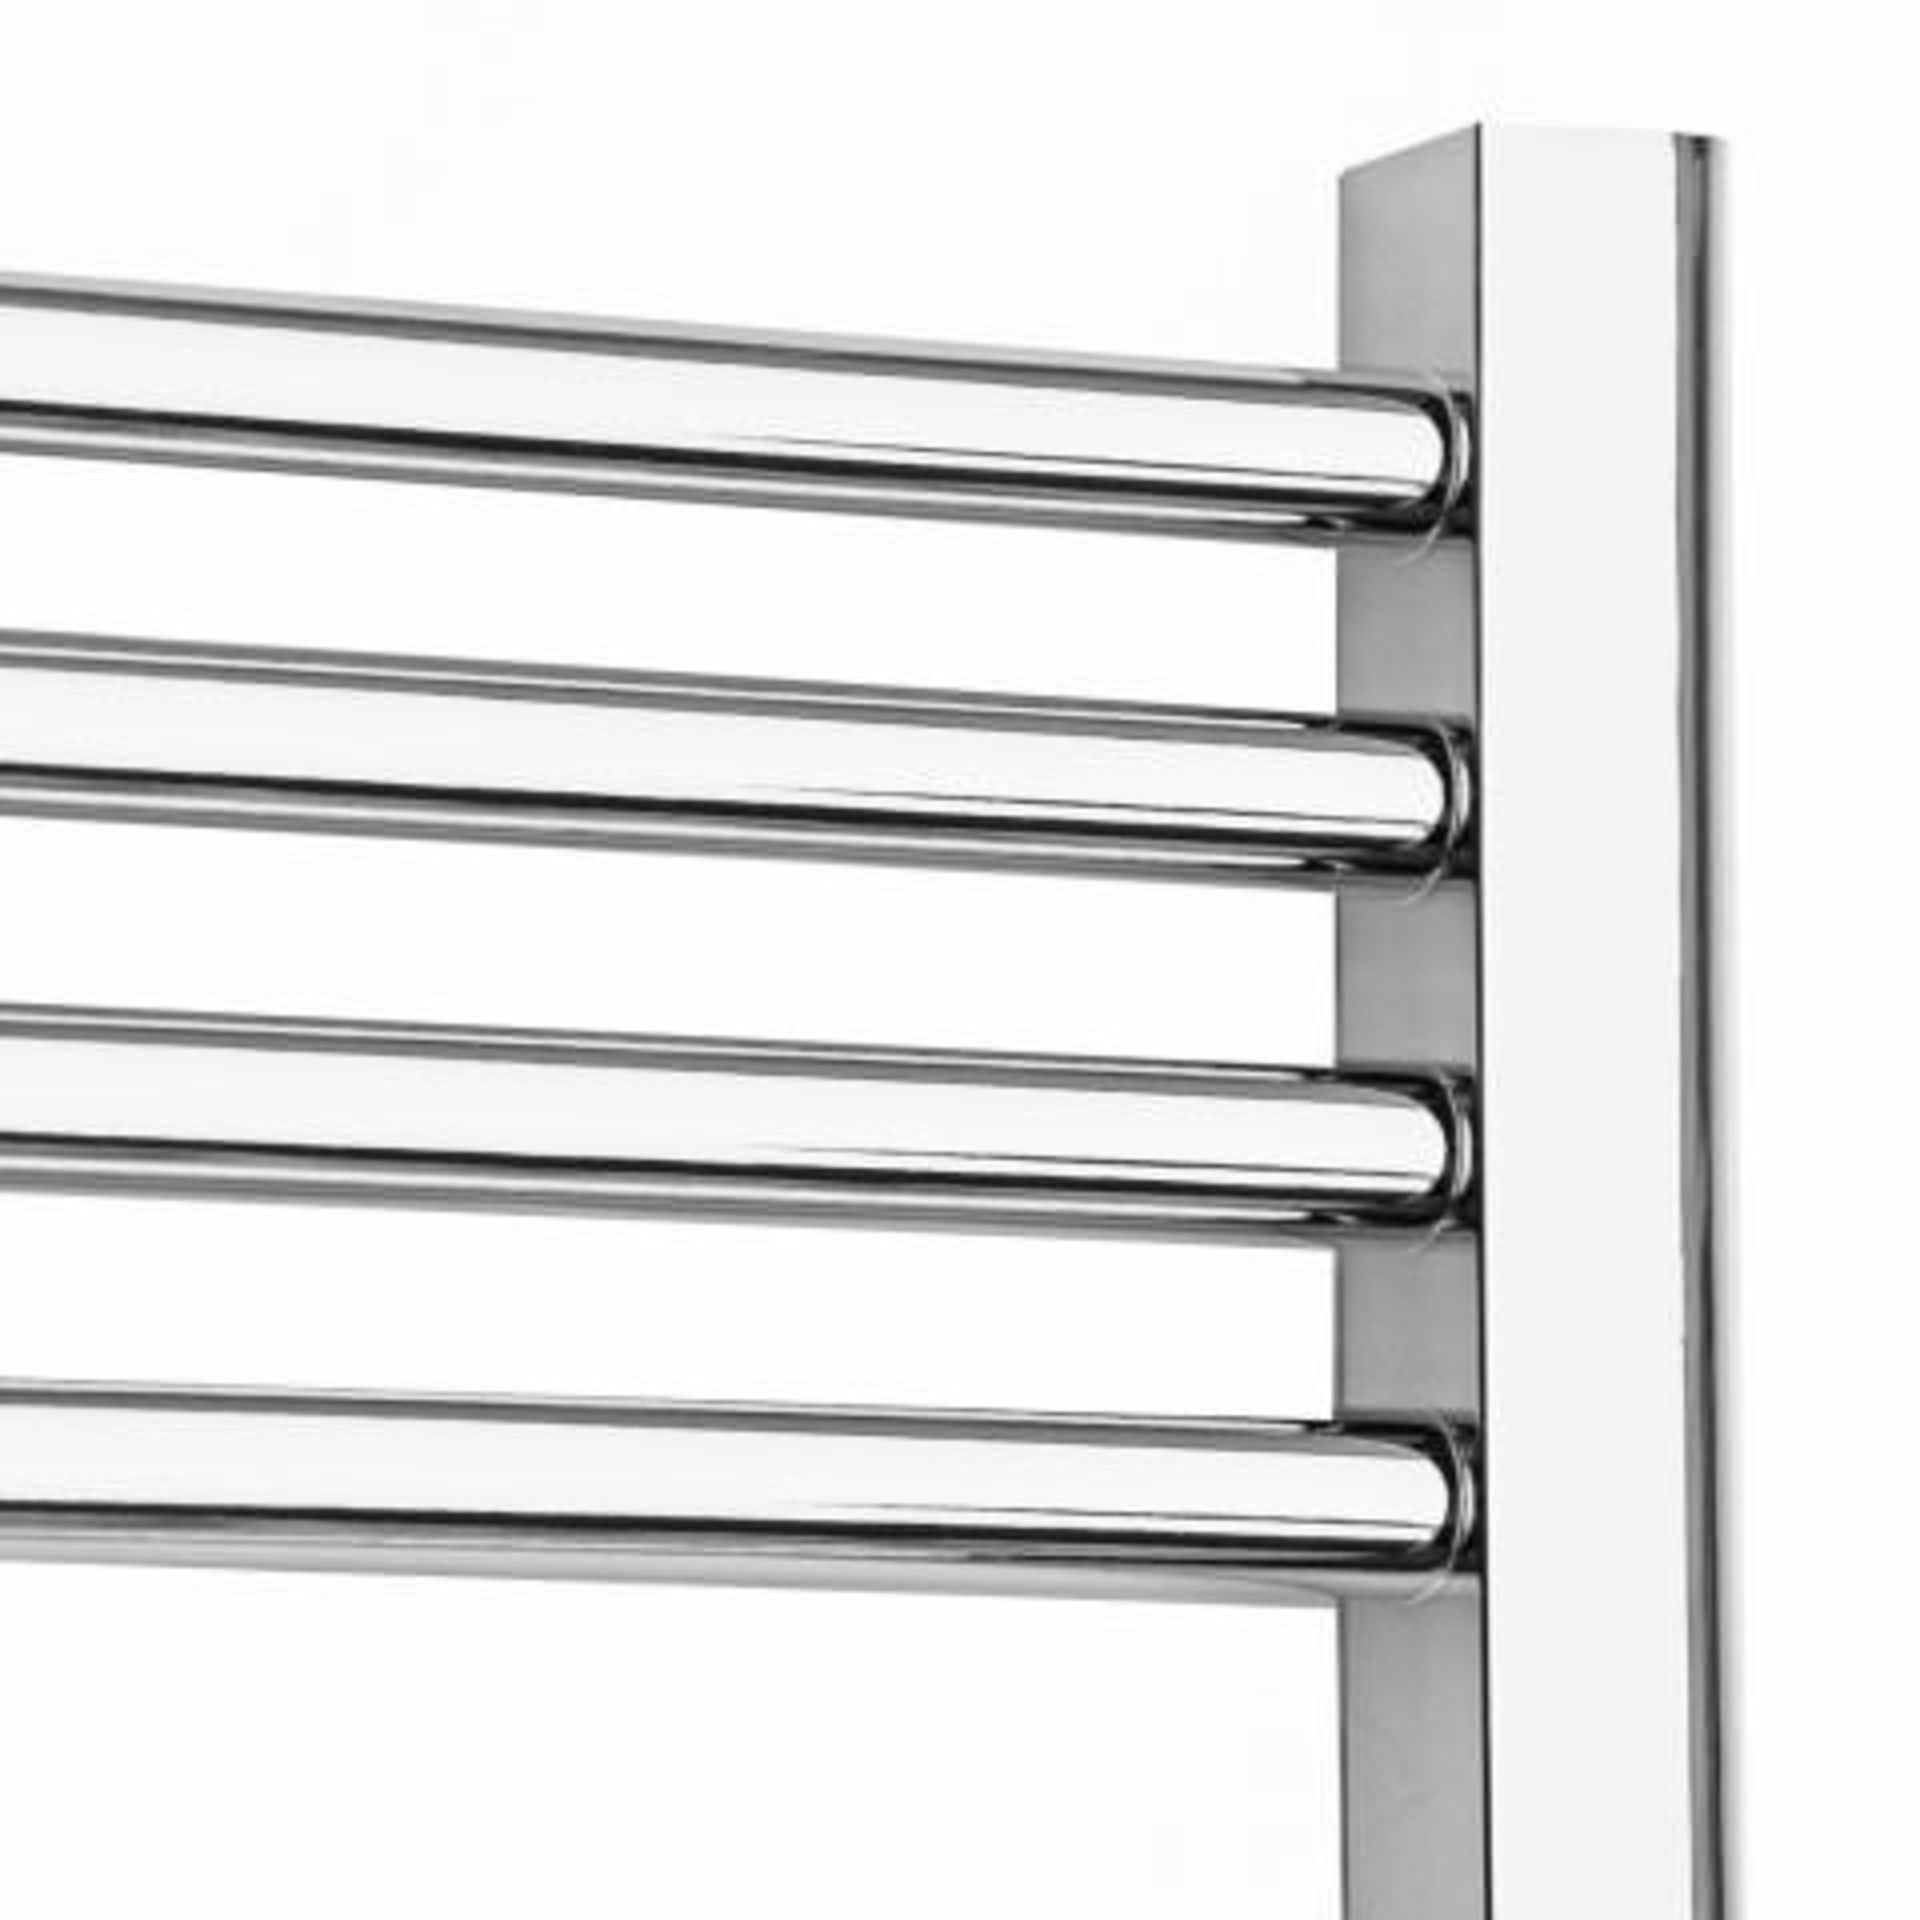 (Z217) 650x400mm - 25mm Tubes - Chrome Heated Straight Rail Ladder Towel Radiator Benefit from the - Image 3 of 3